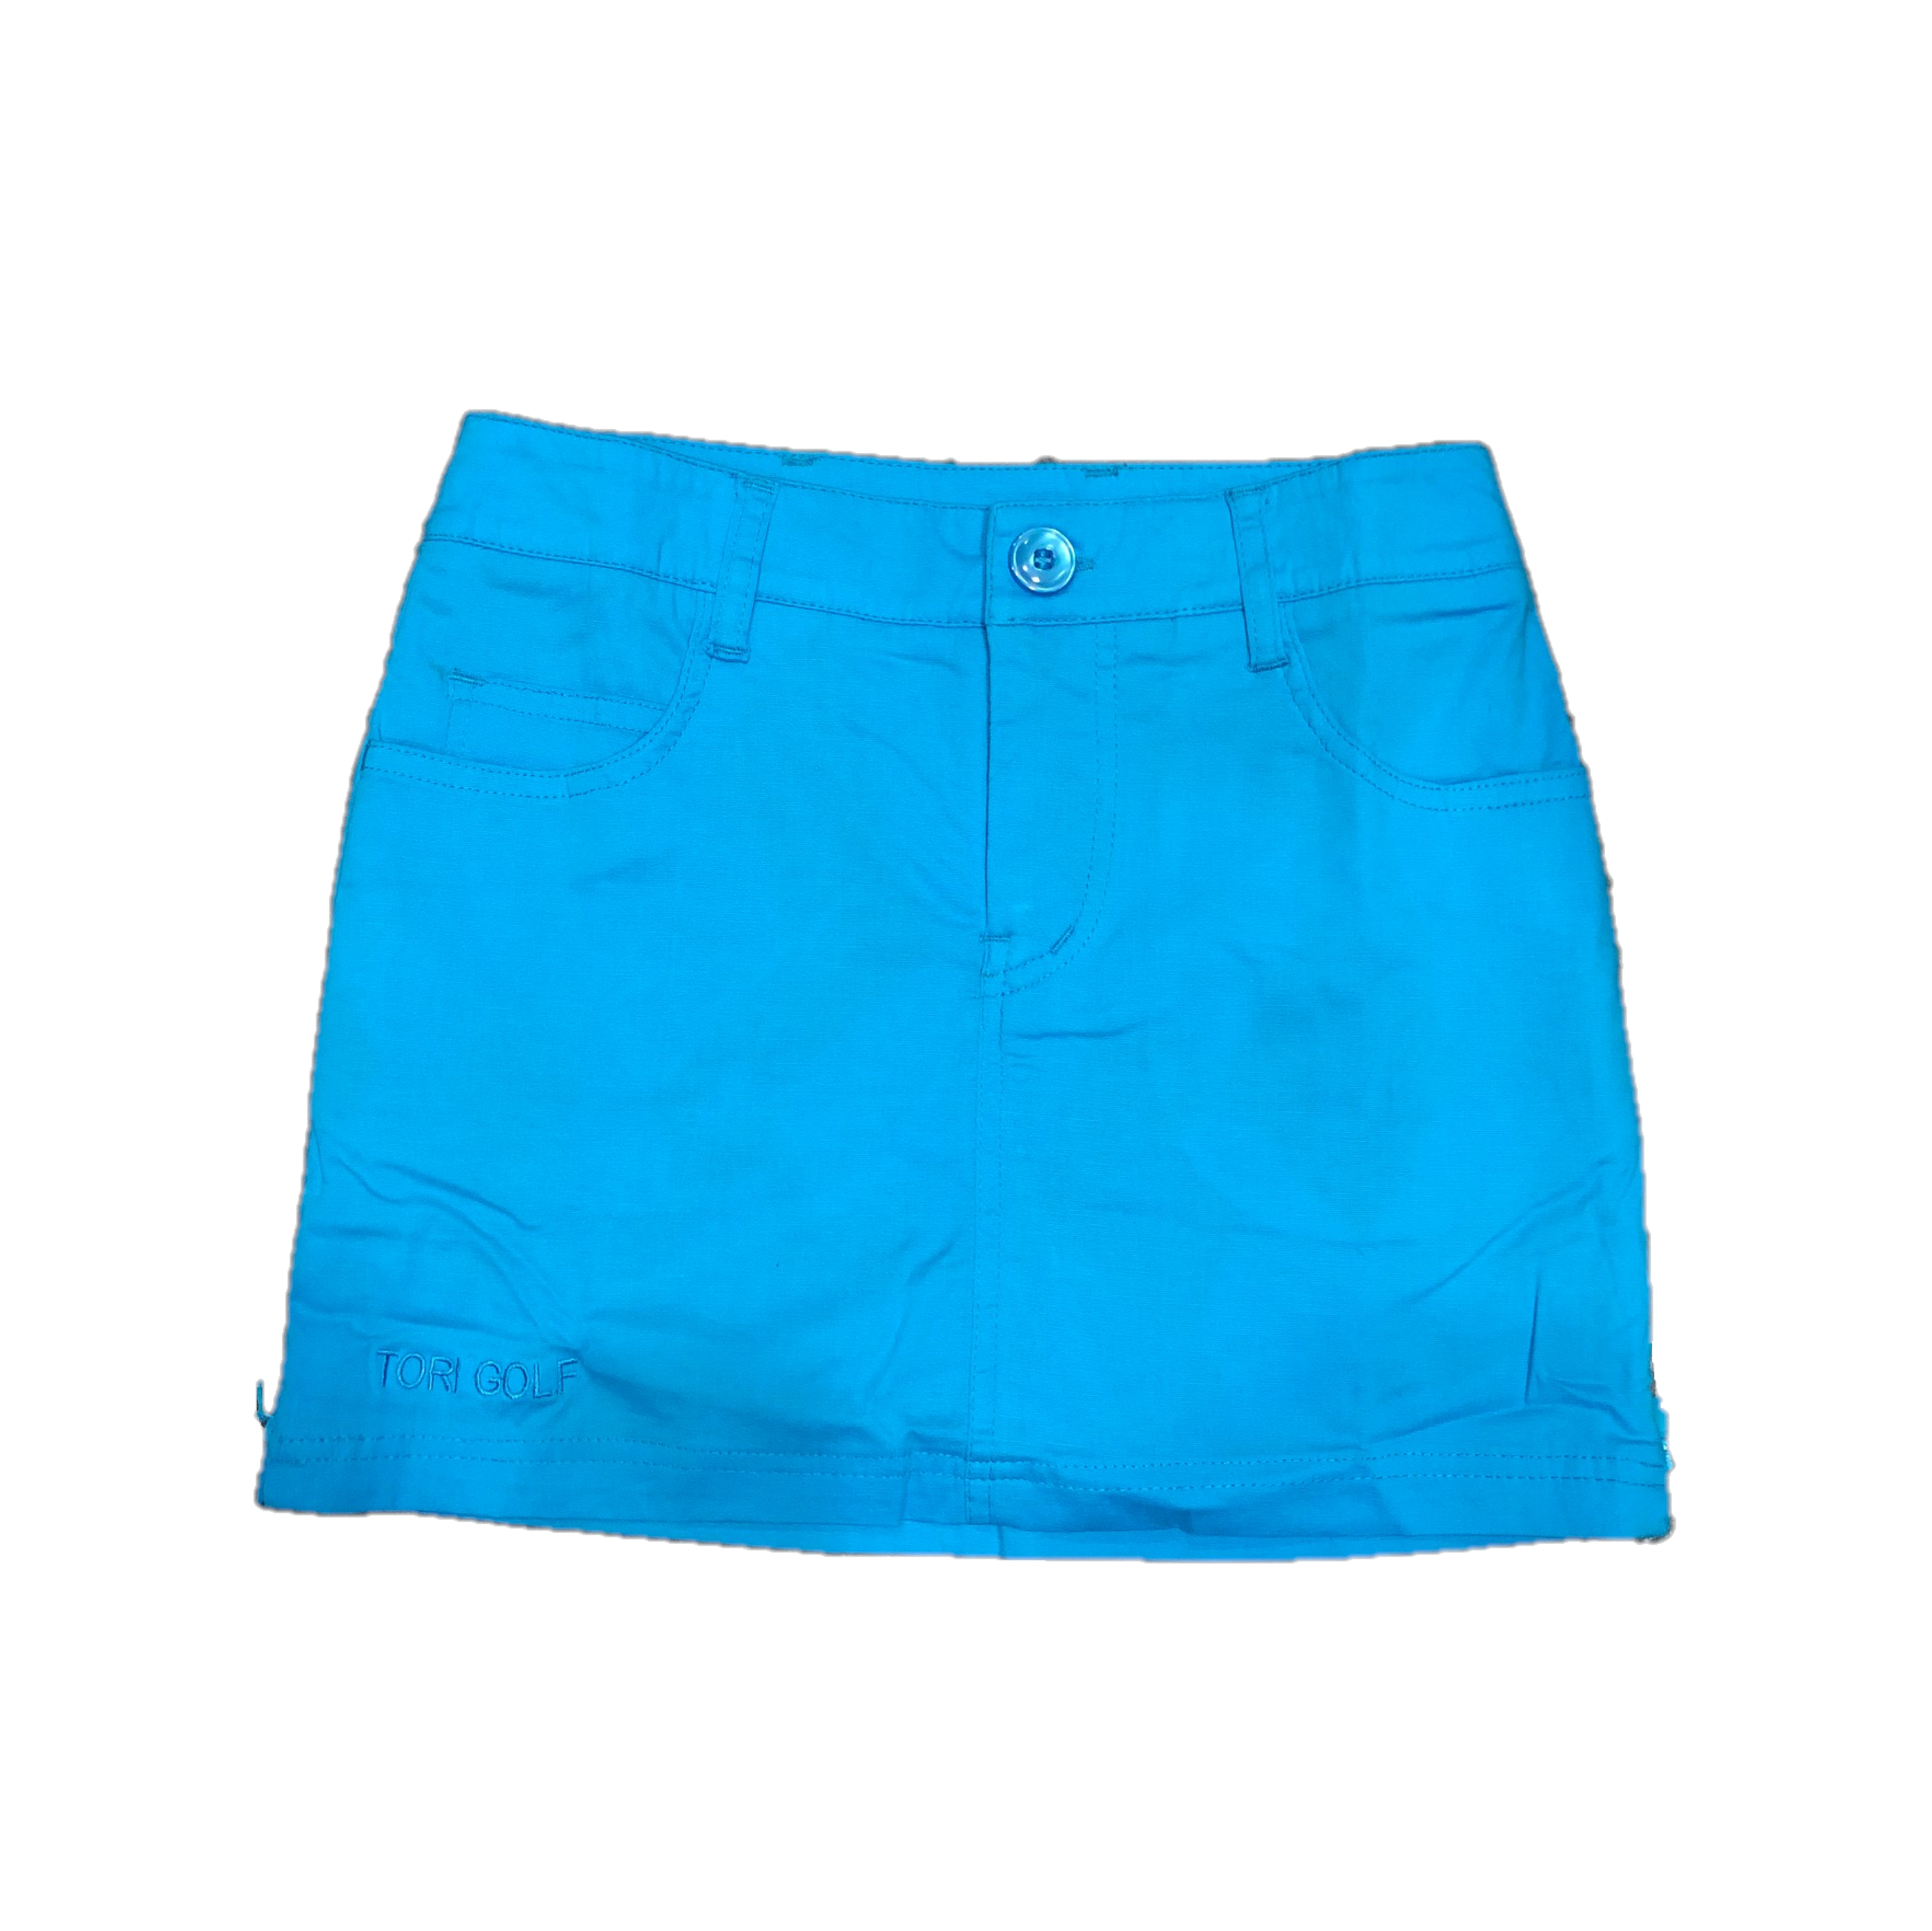 LS-021G || Skirt Bright Blue With 2 Round Pocket, 2 Rear Patch Pockets Round Zipper And 2 Zipped Side Vents.